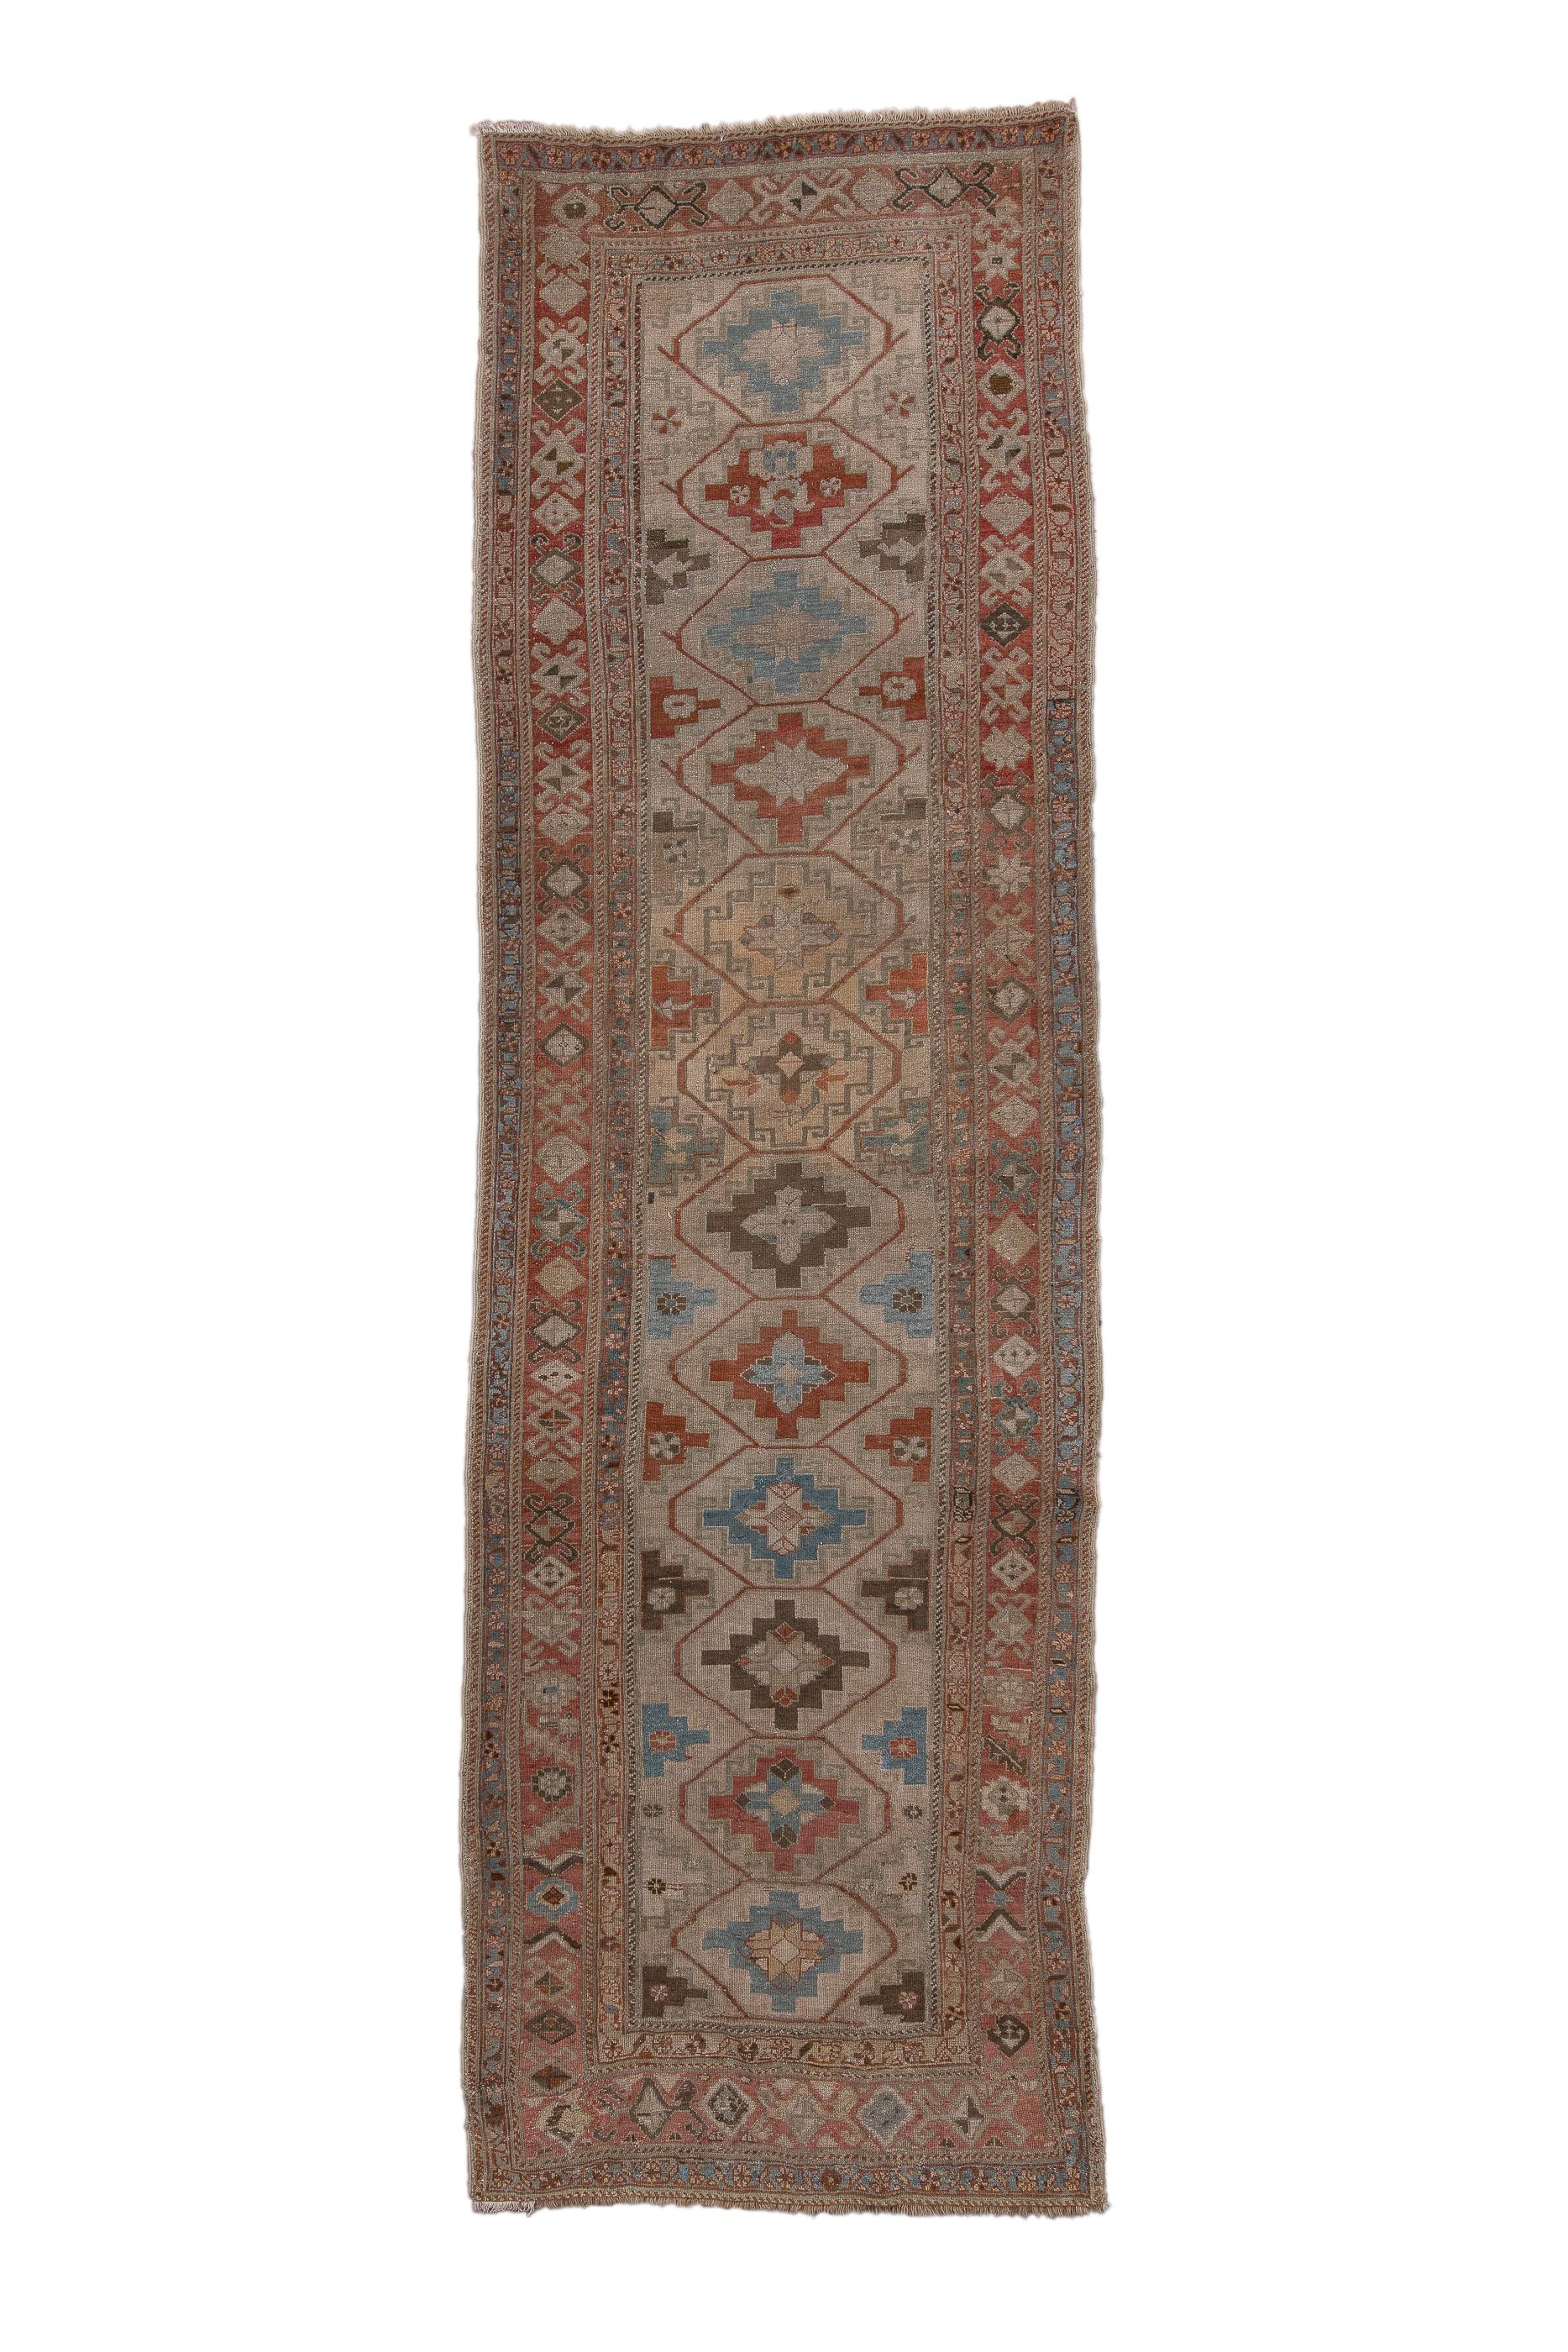 The camel-tone field shows a central column of twelve adjoined “Memling guls” enclosing stepped lozenges in red, rust, teal and beige, with half en suite lozenges along the sides. Narrow main border is in the Turkmen style with rams’ horn